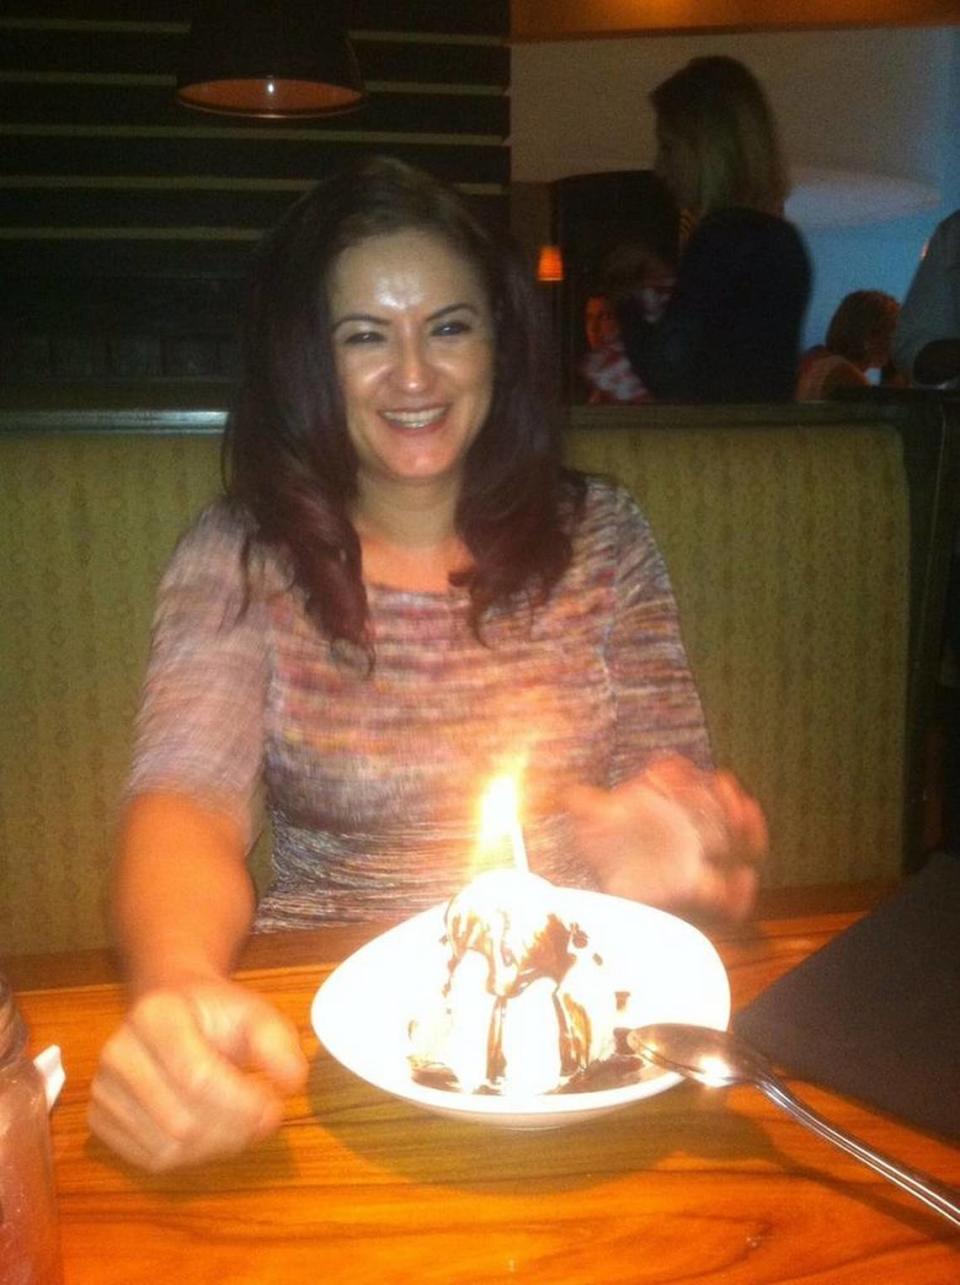 Amparo Godinez Sanchez celebrated her 39th birthday with a flaming dessert. She went to Las Vegas with several of her friends.